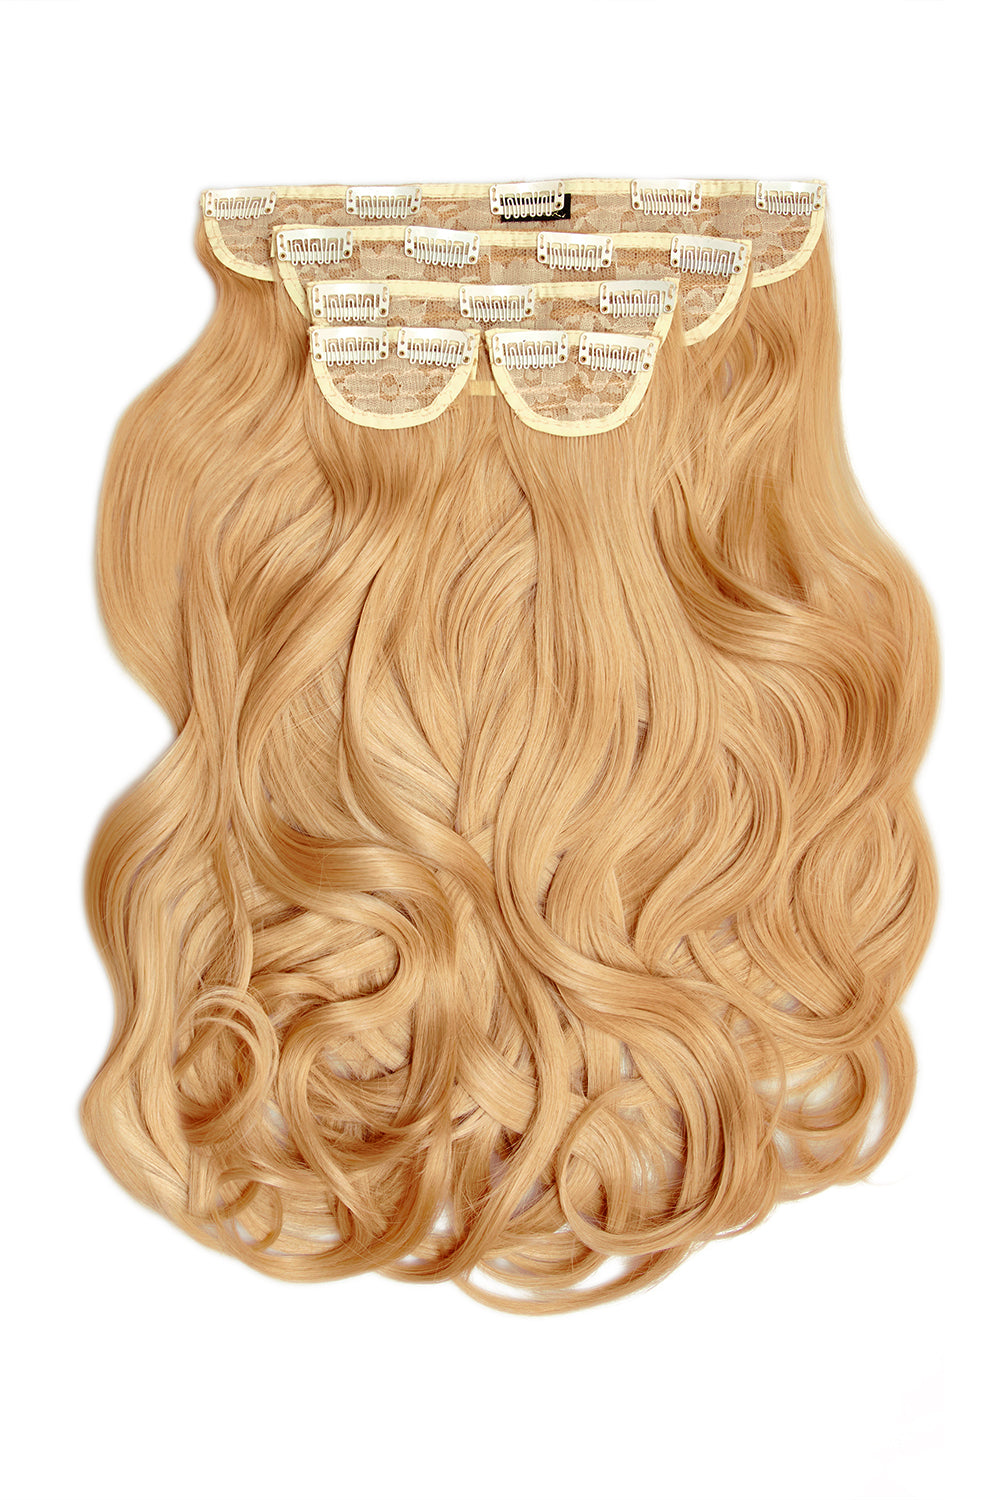 Super Thick 22" 5 Piece Blow Dry Wavy Clip In Hair Extensions - Caramel Blonde